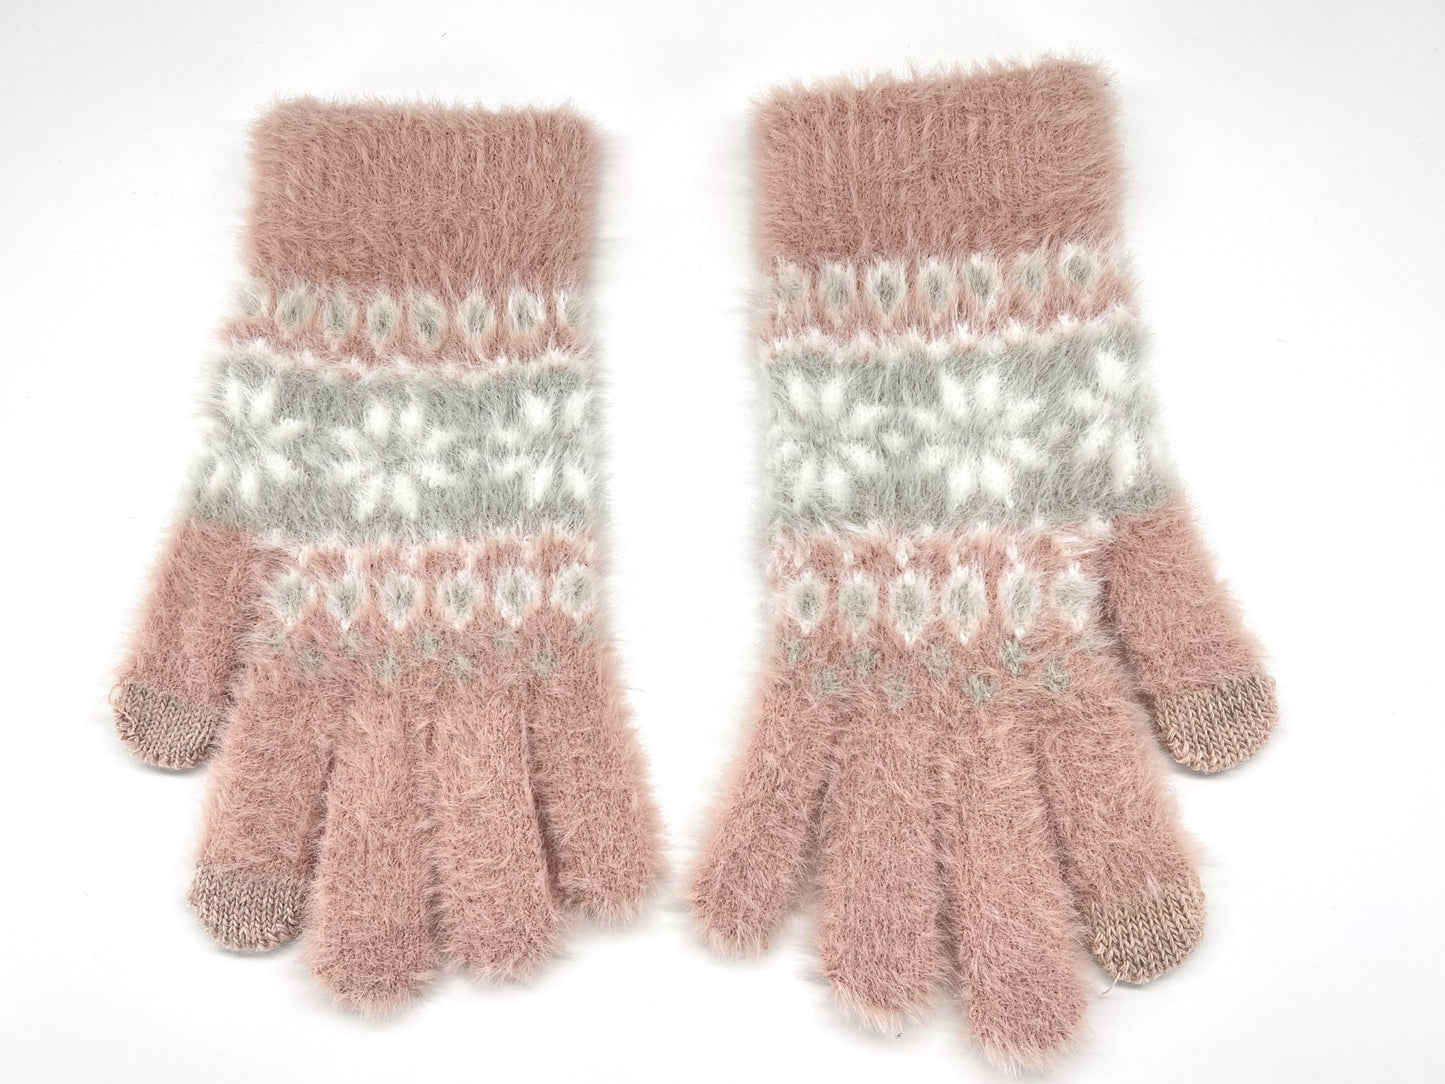 Ladies Touchscreen Gloves Soft Fluffy Fair Isle Pattern Knitted Winter Gloves